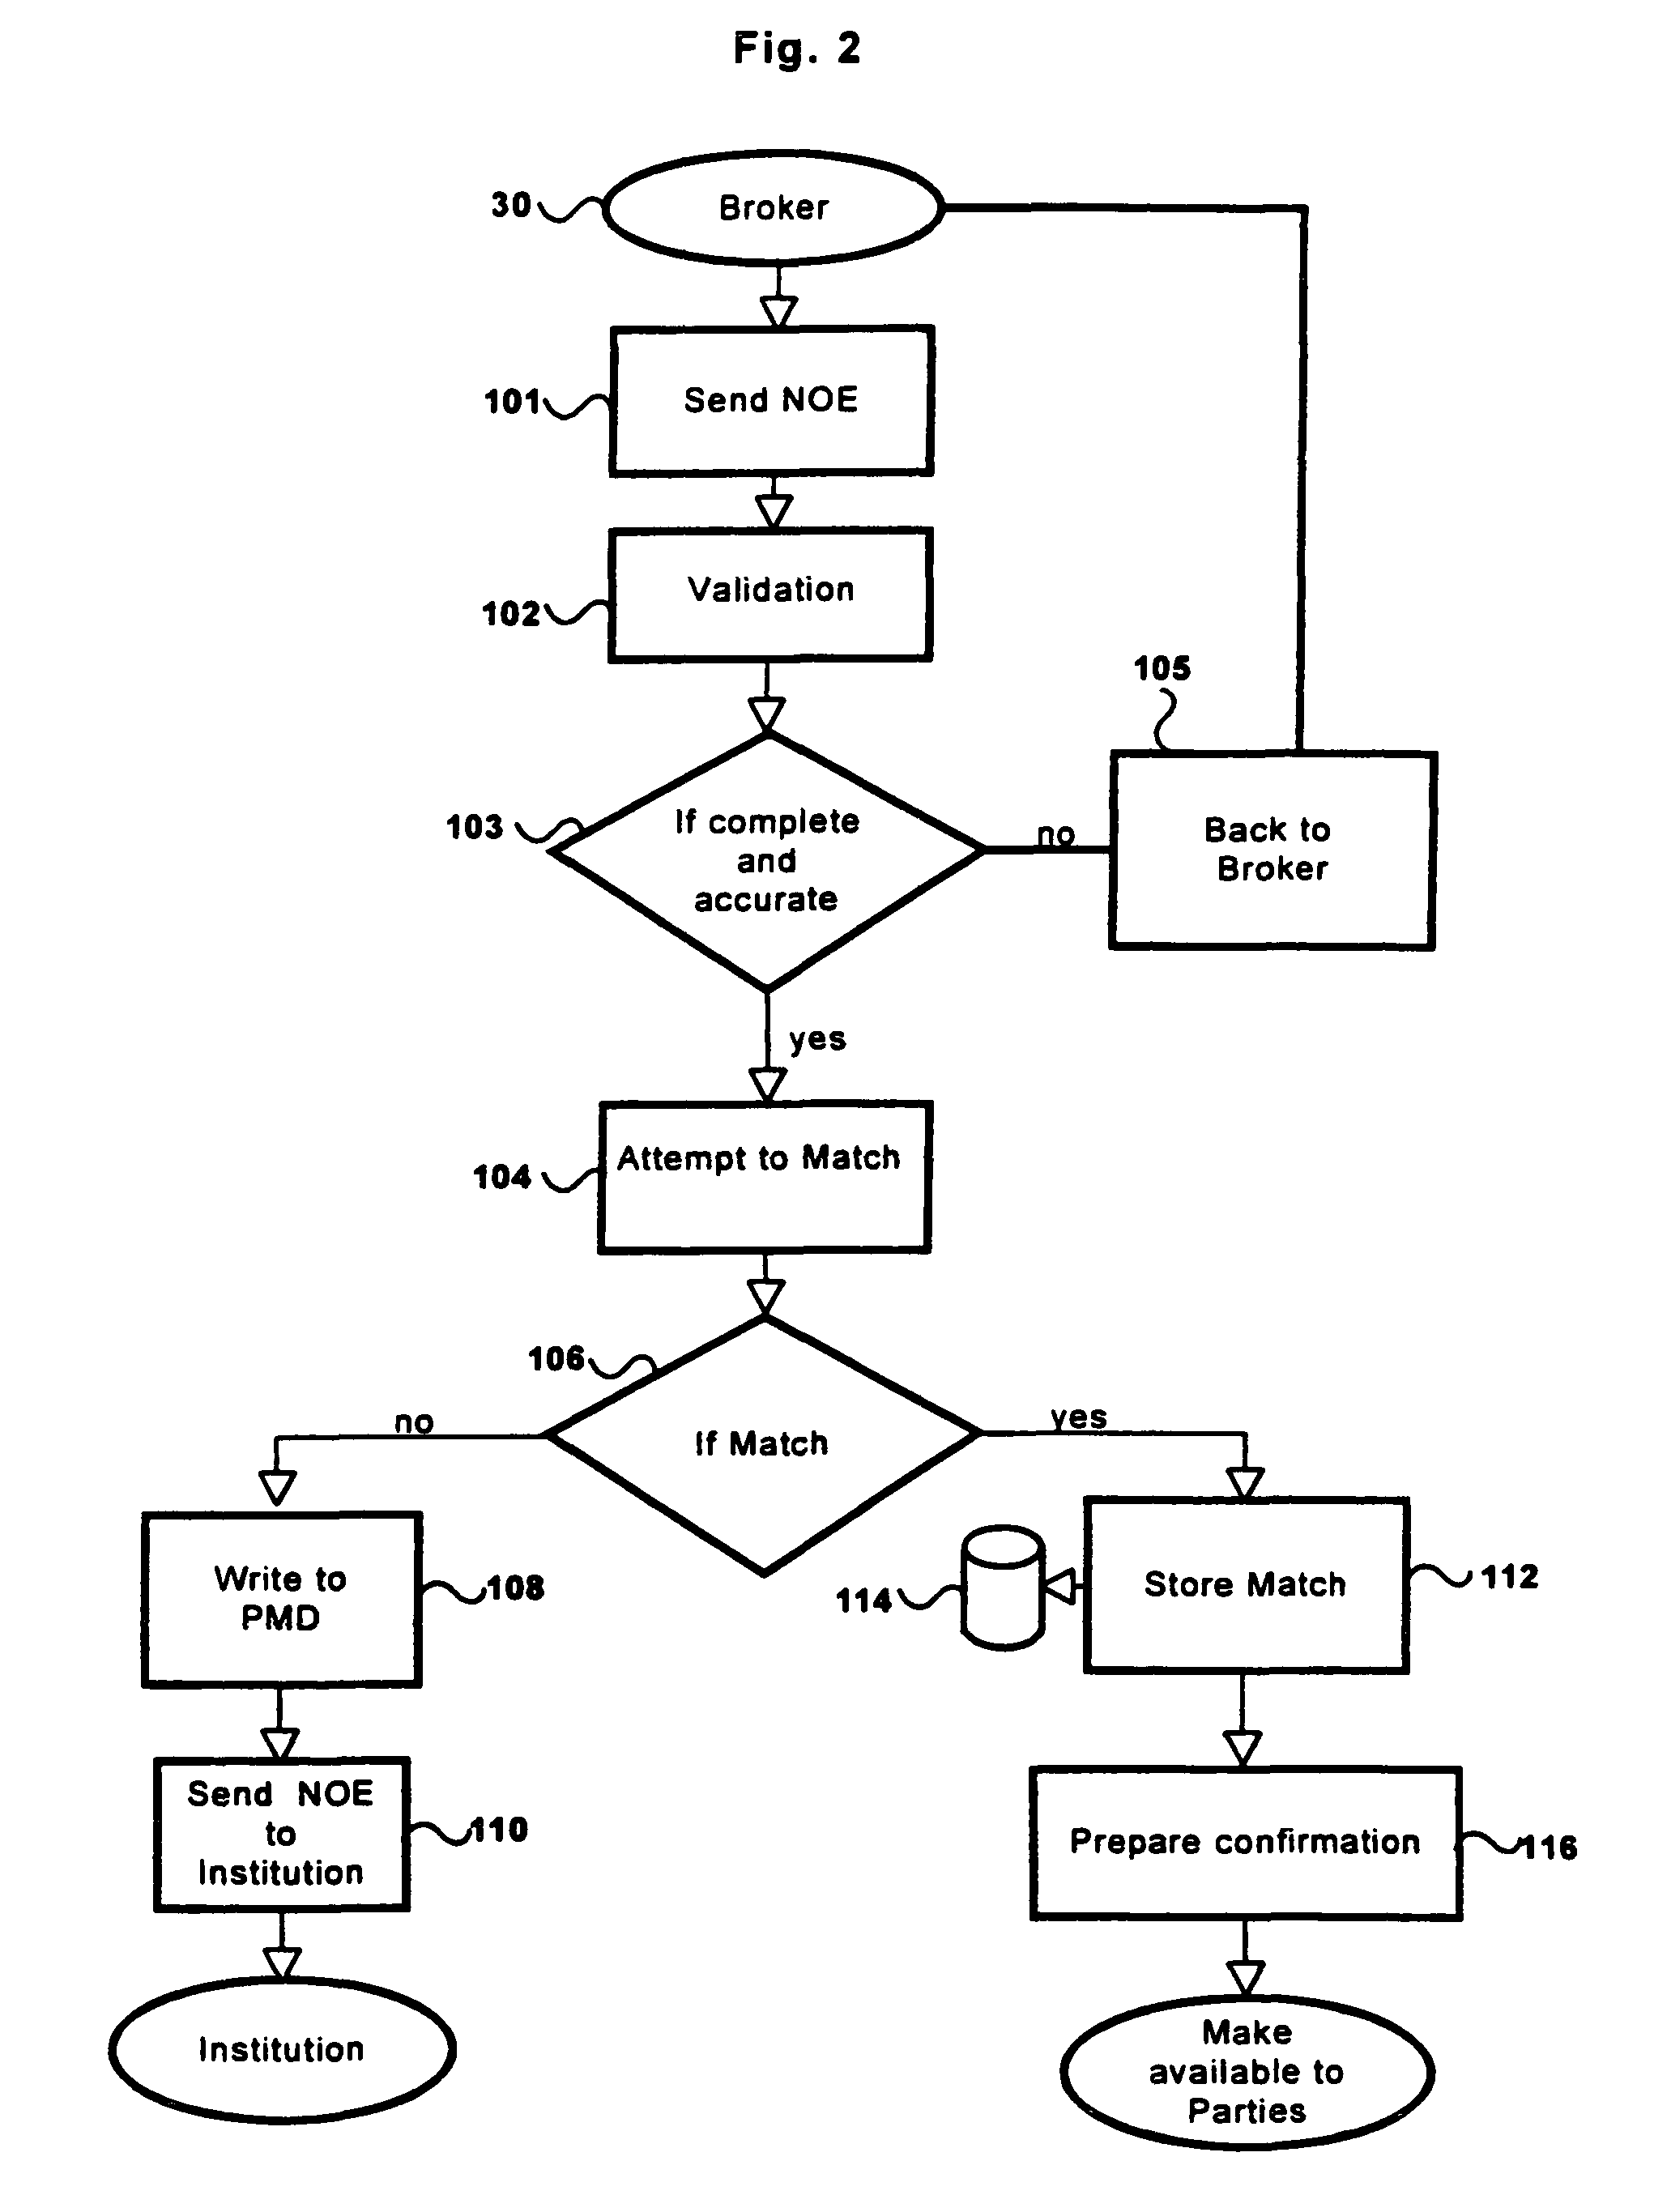 Enhanced matching apparatus and method for post-trade processing and settlement of securities transactions